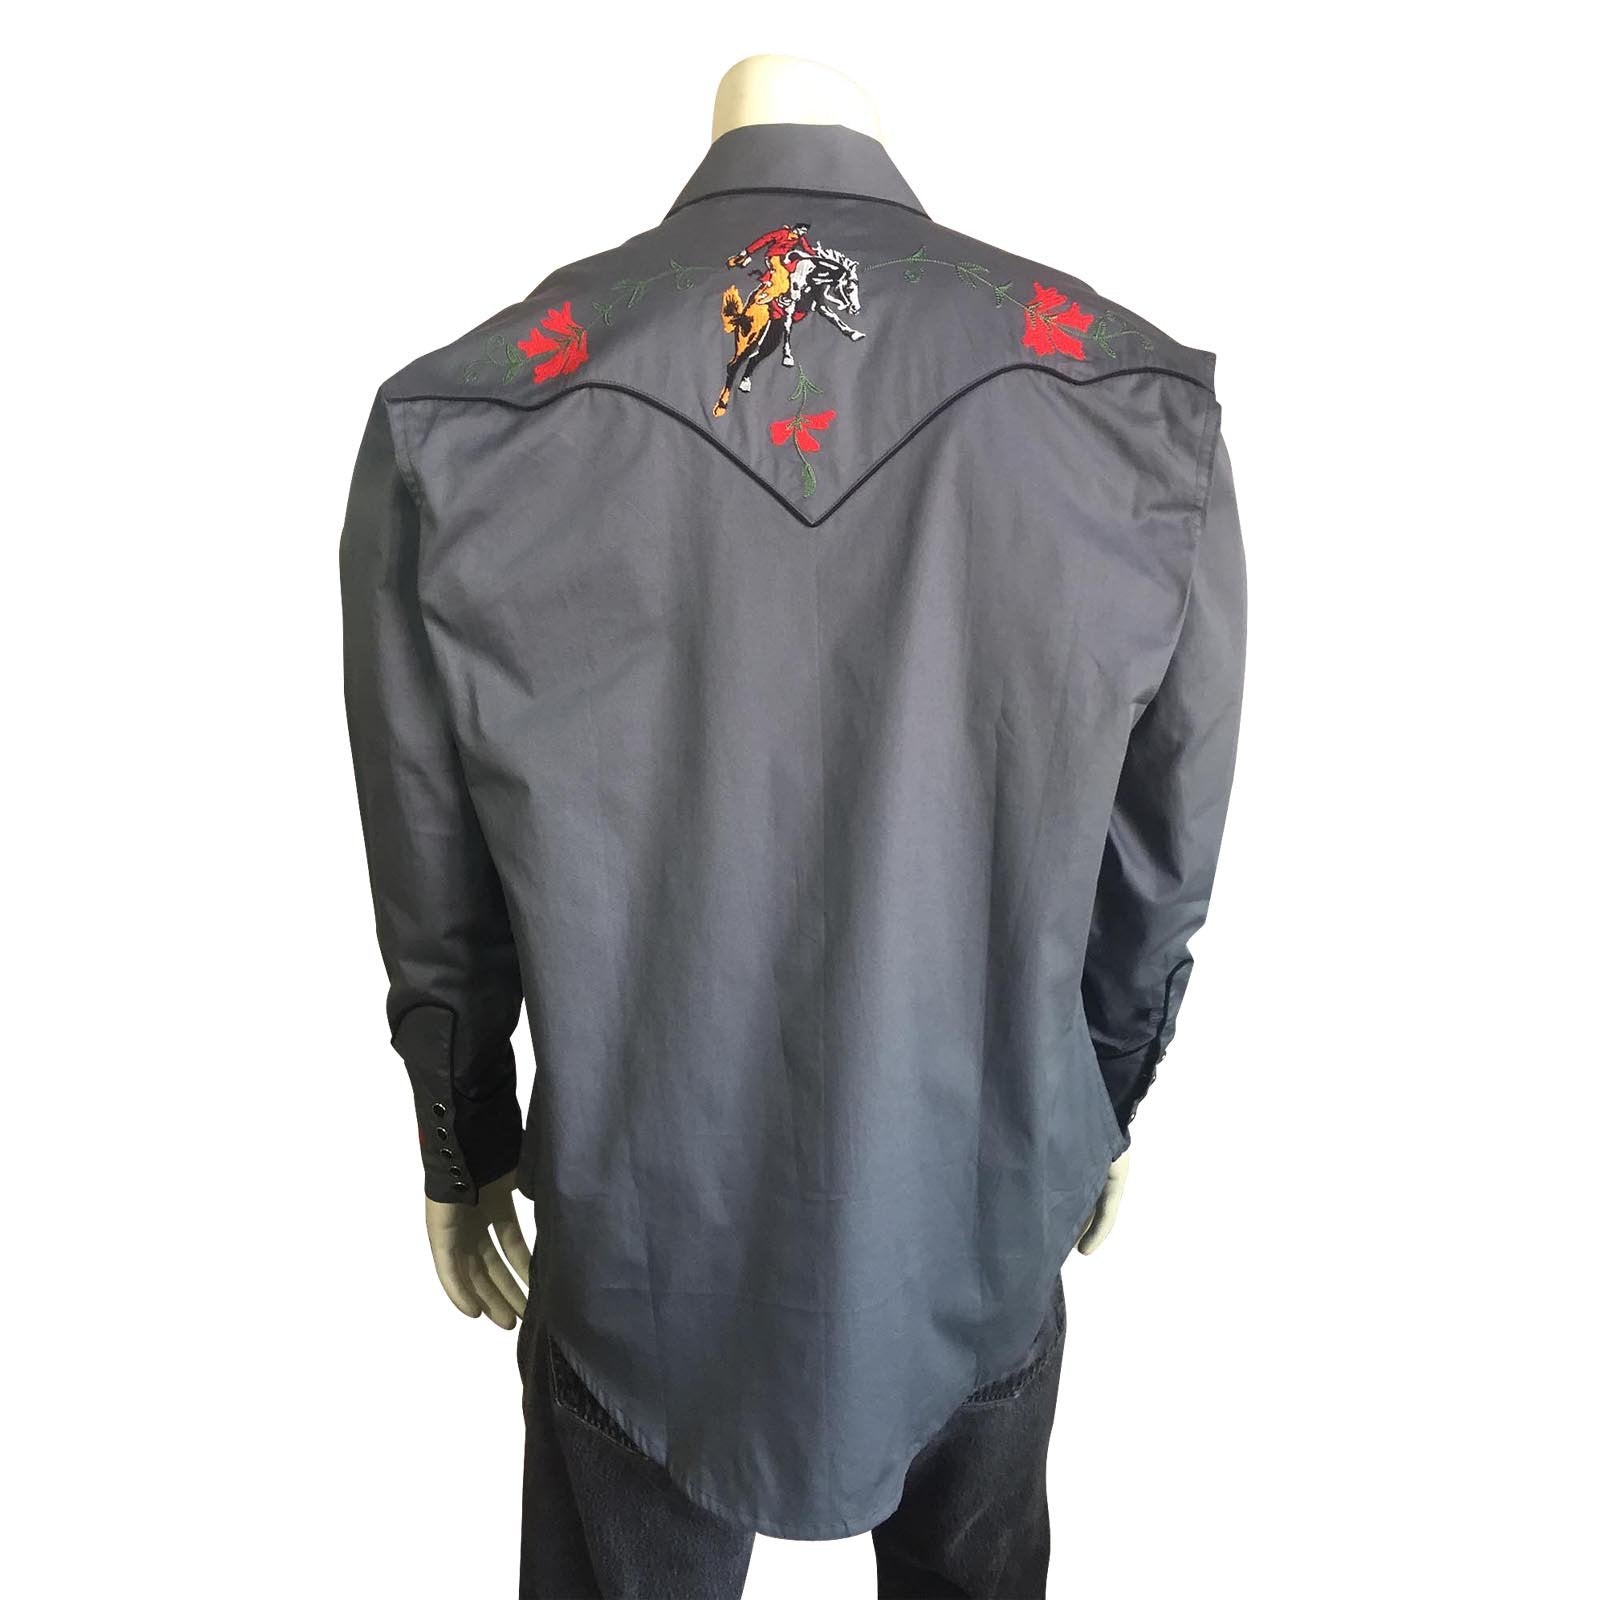 Rockmount Ranch Wear Men's Vintage Inspired Bucking Bronc Embroidered Shirt Back #176840A